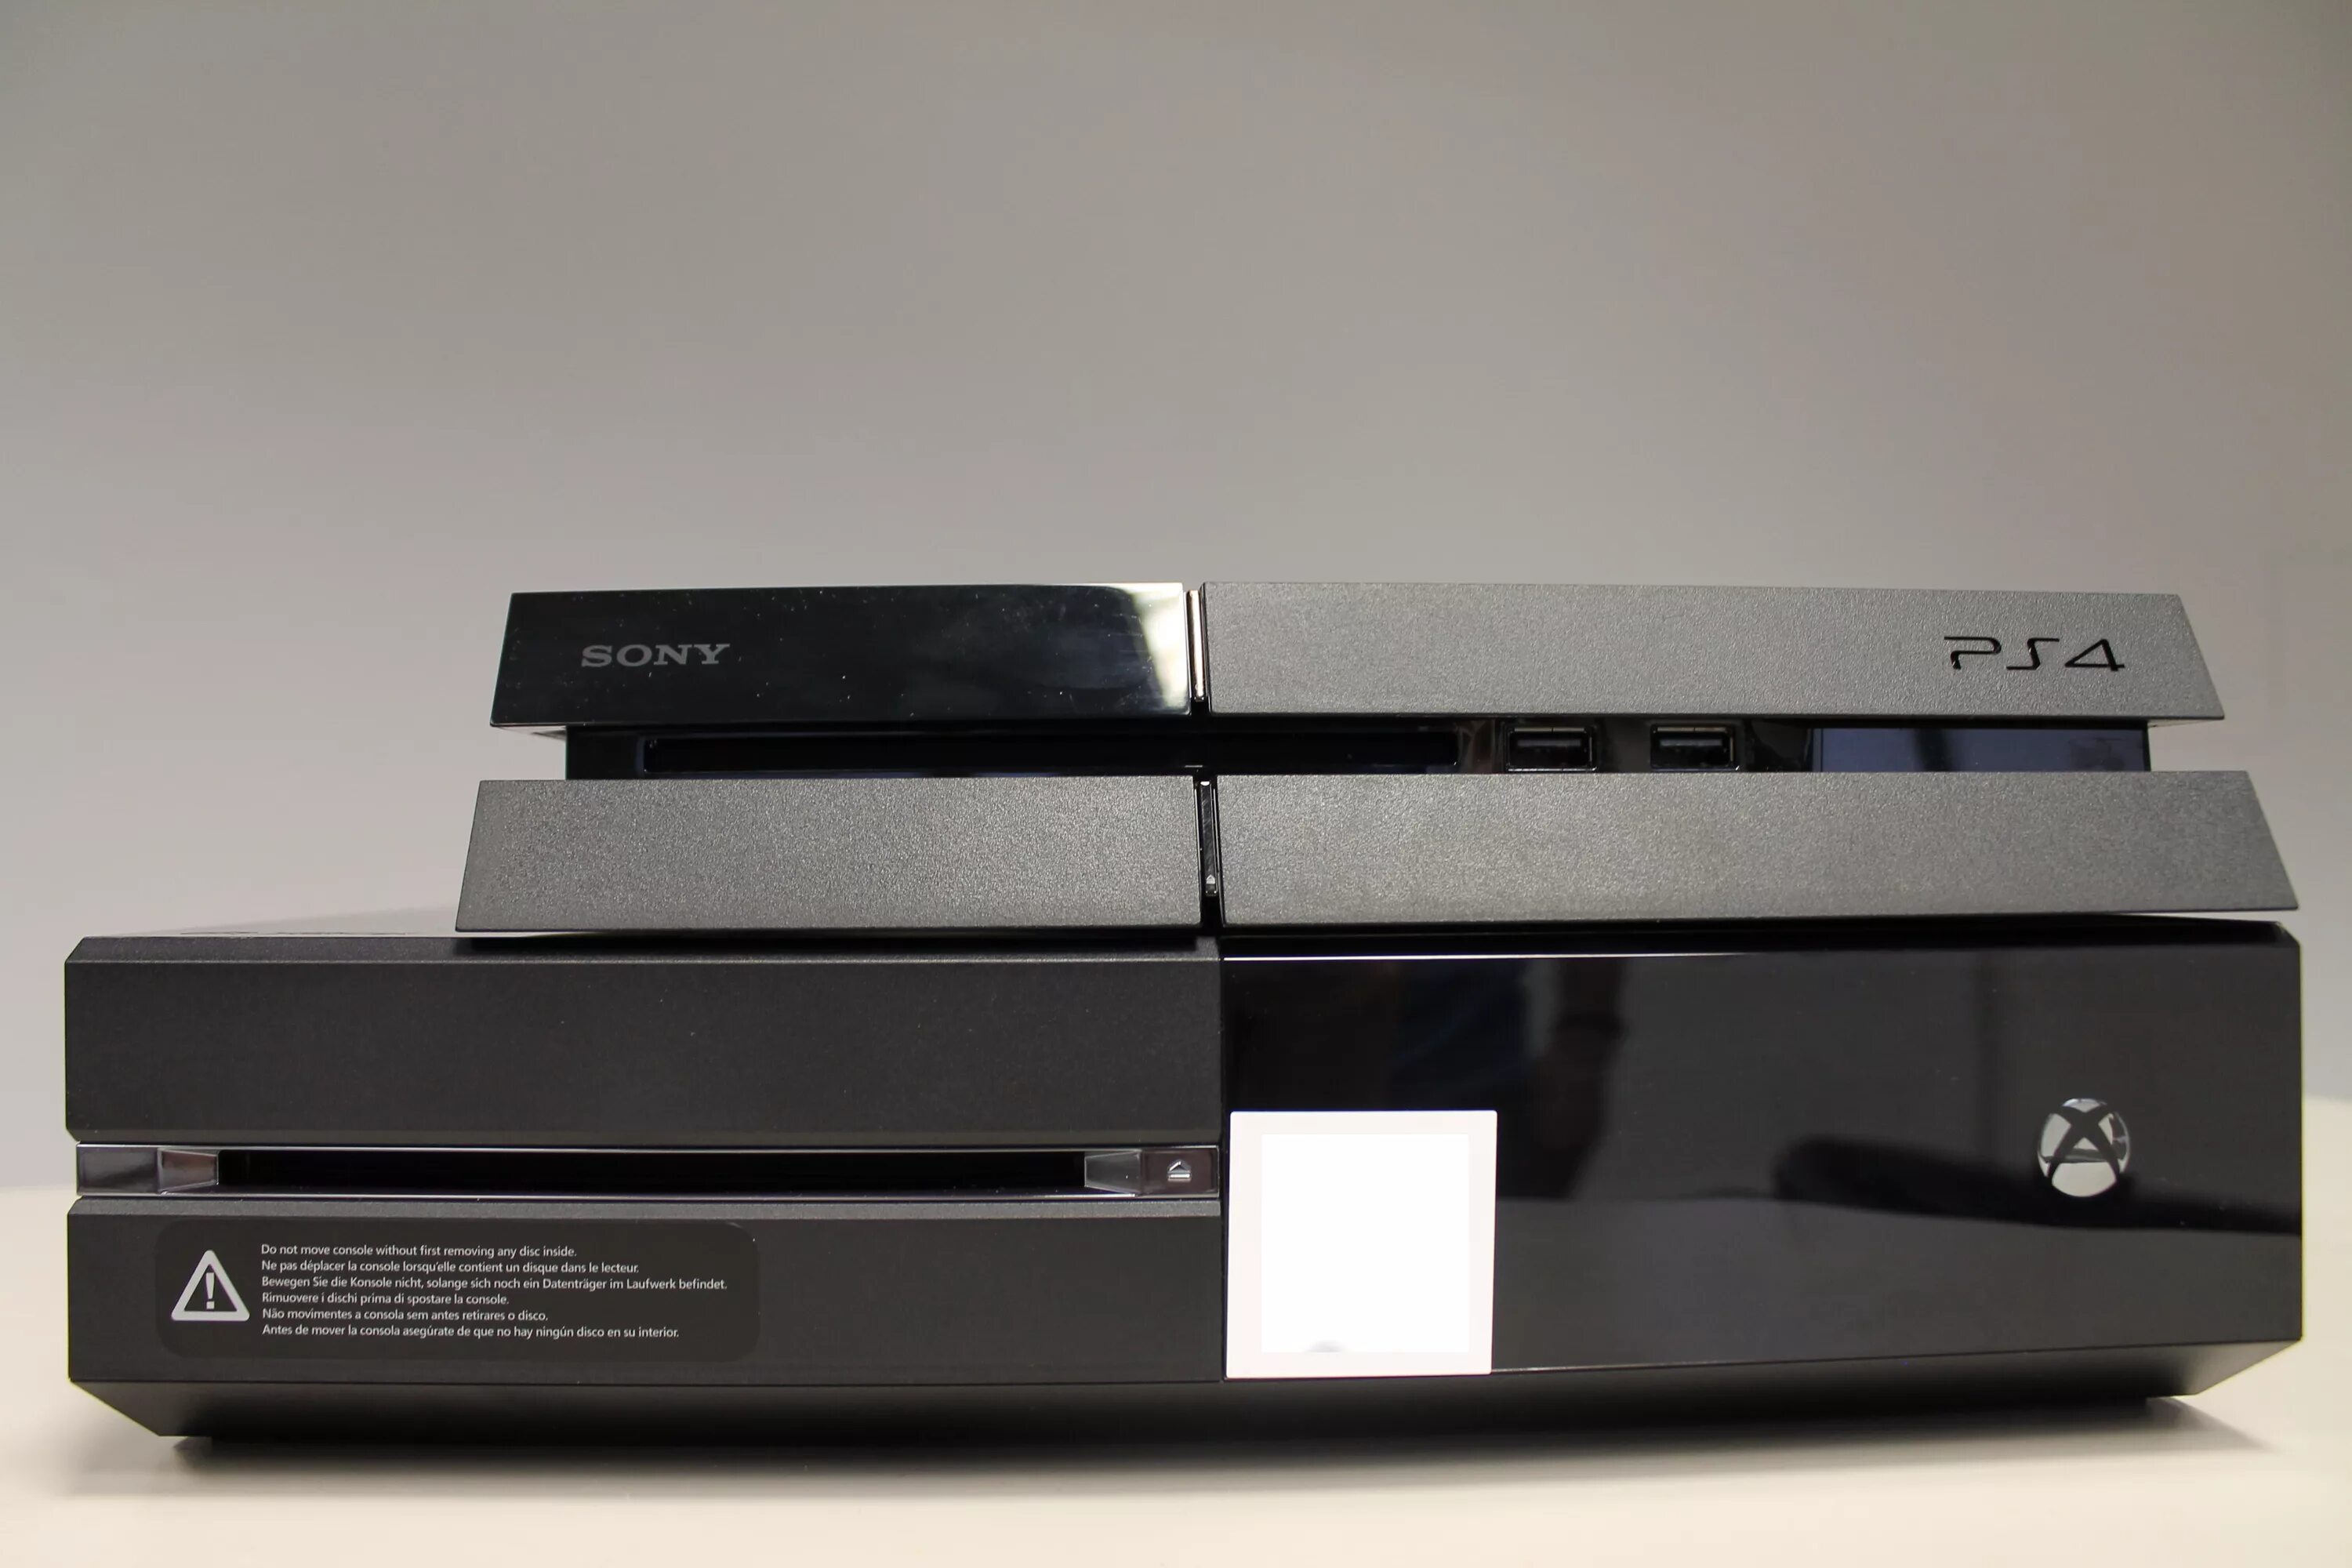 Ps4 Xbox one. Габариты пс4 фат. ПСП 4 фат. Xbox one fat. Какие версии ps4